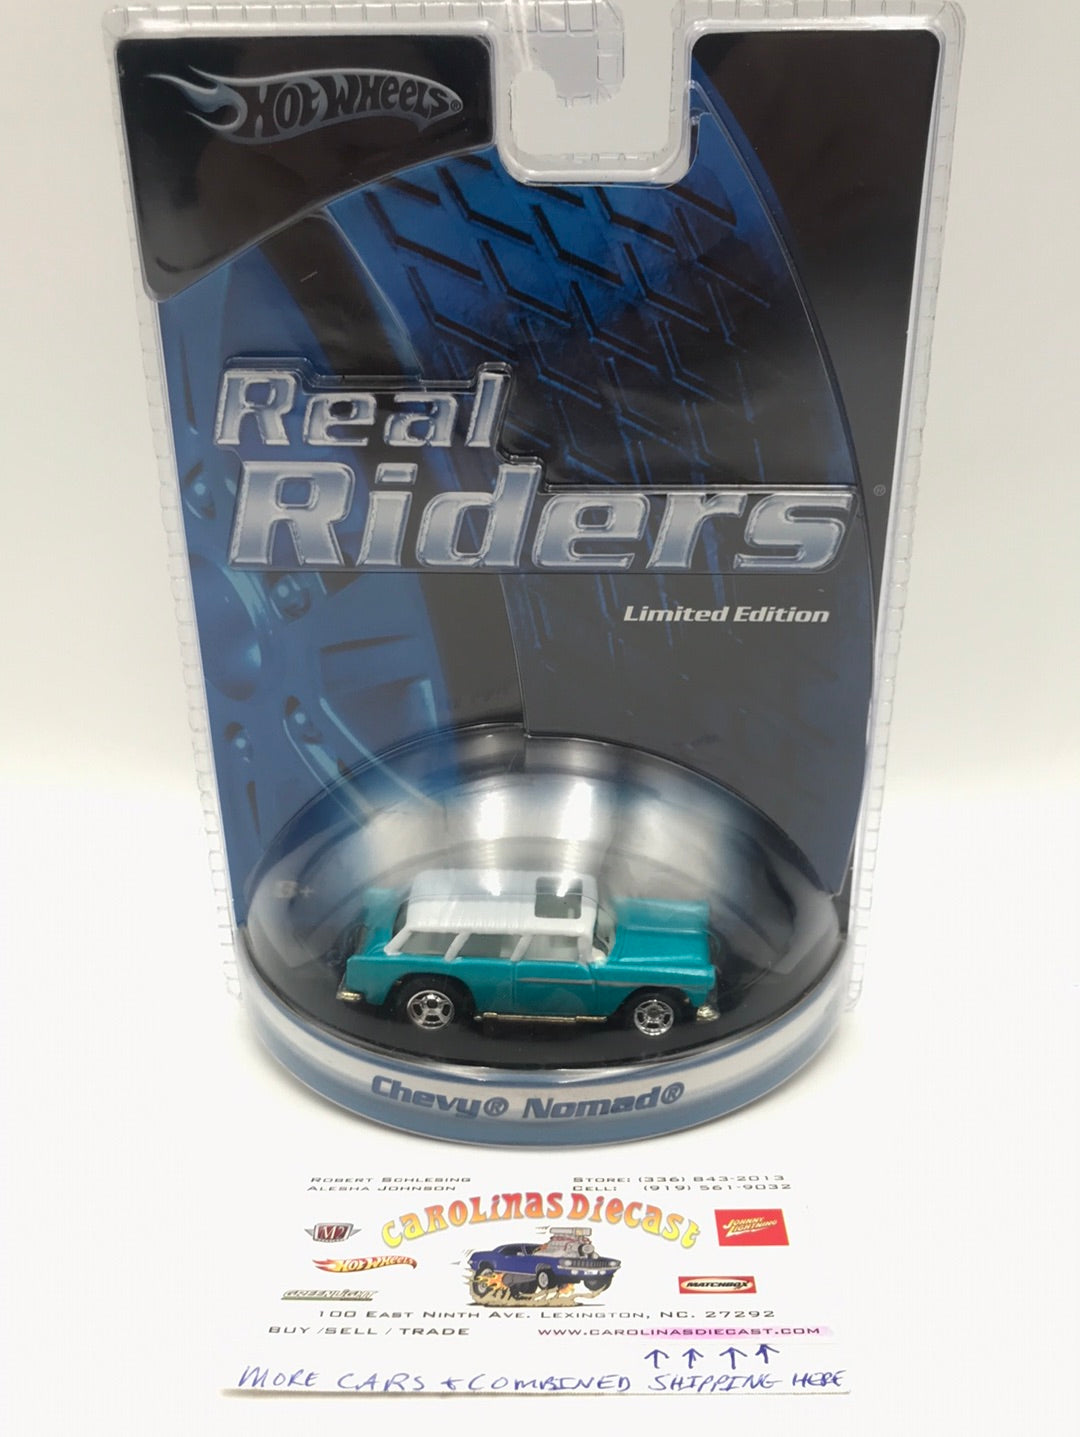 Hot wheels real riders Chevy Nomad limited edition